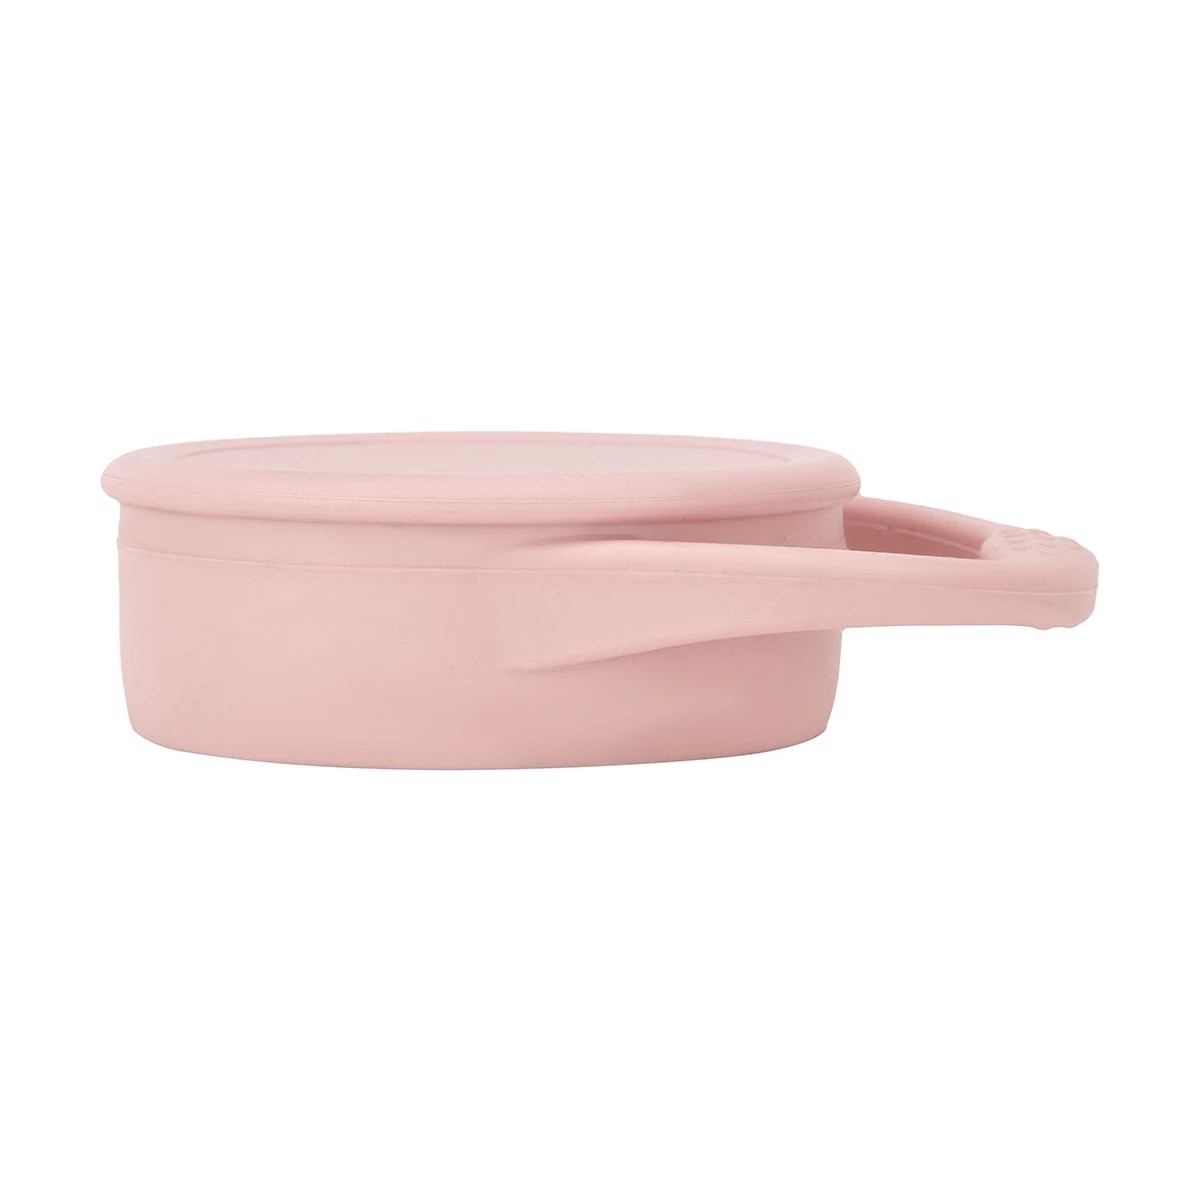 Collapsible Snack Cup - Anko | Target Australia